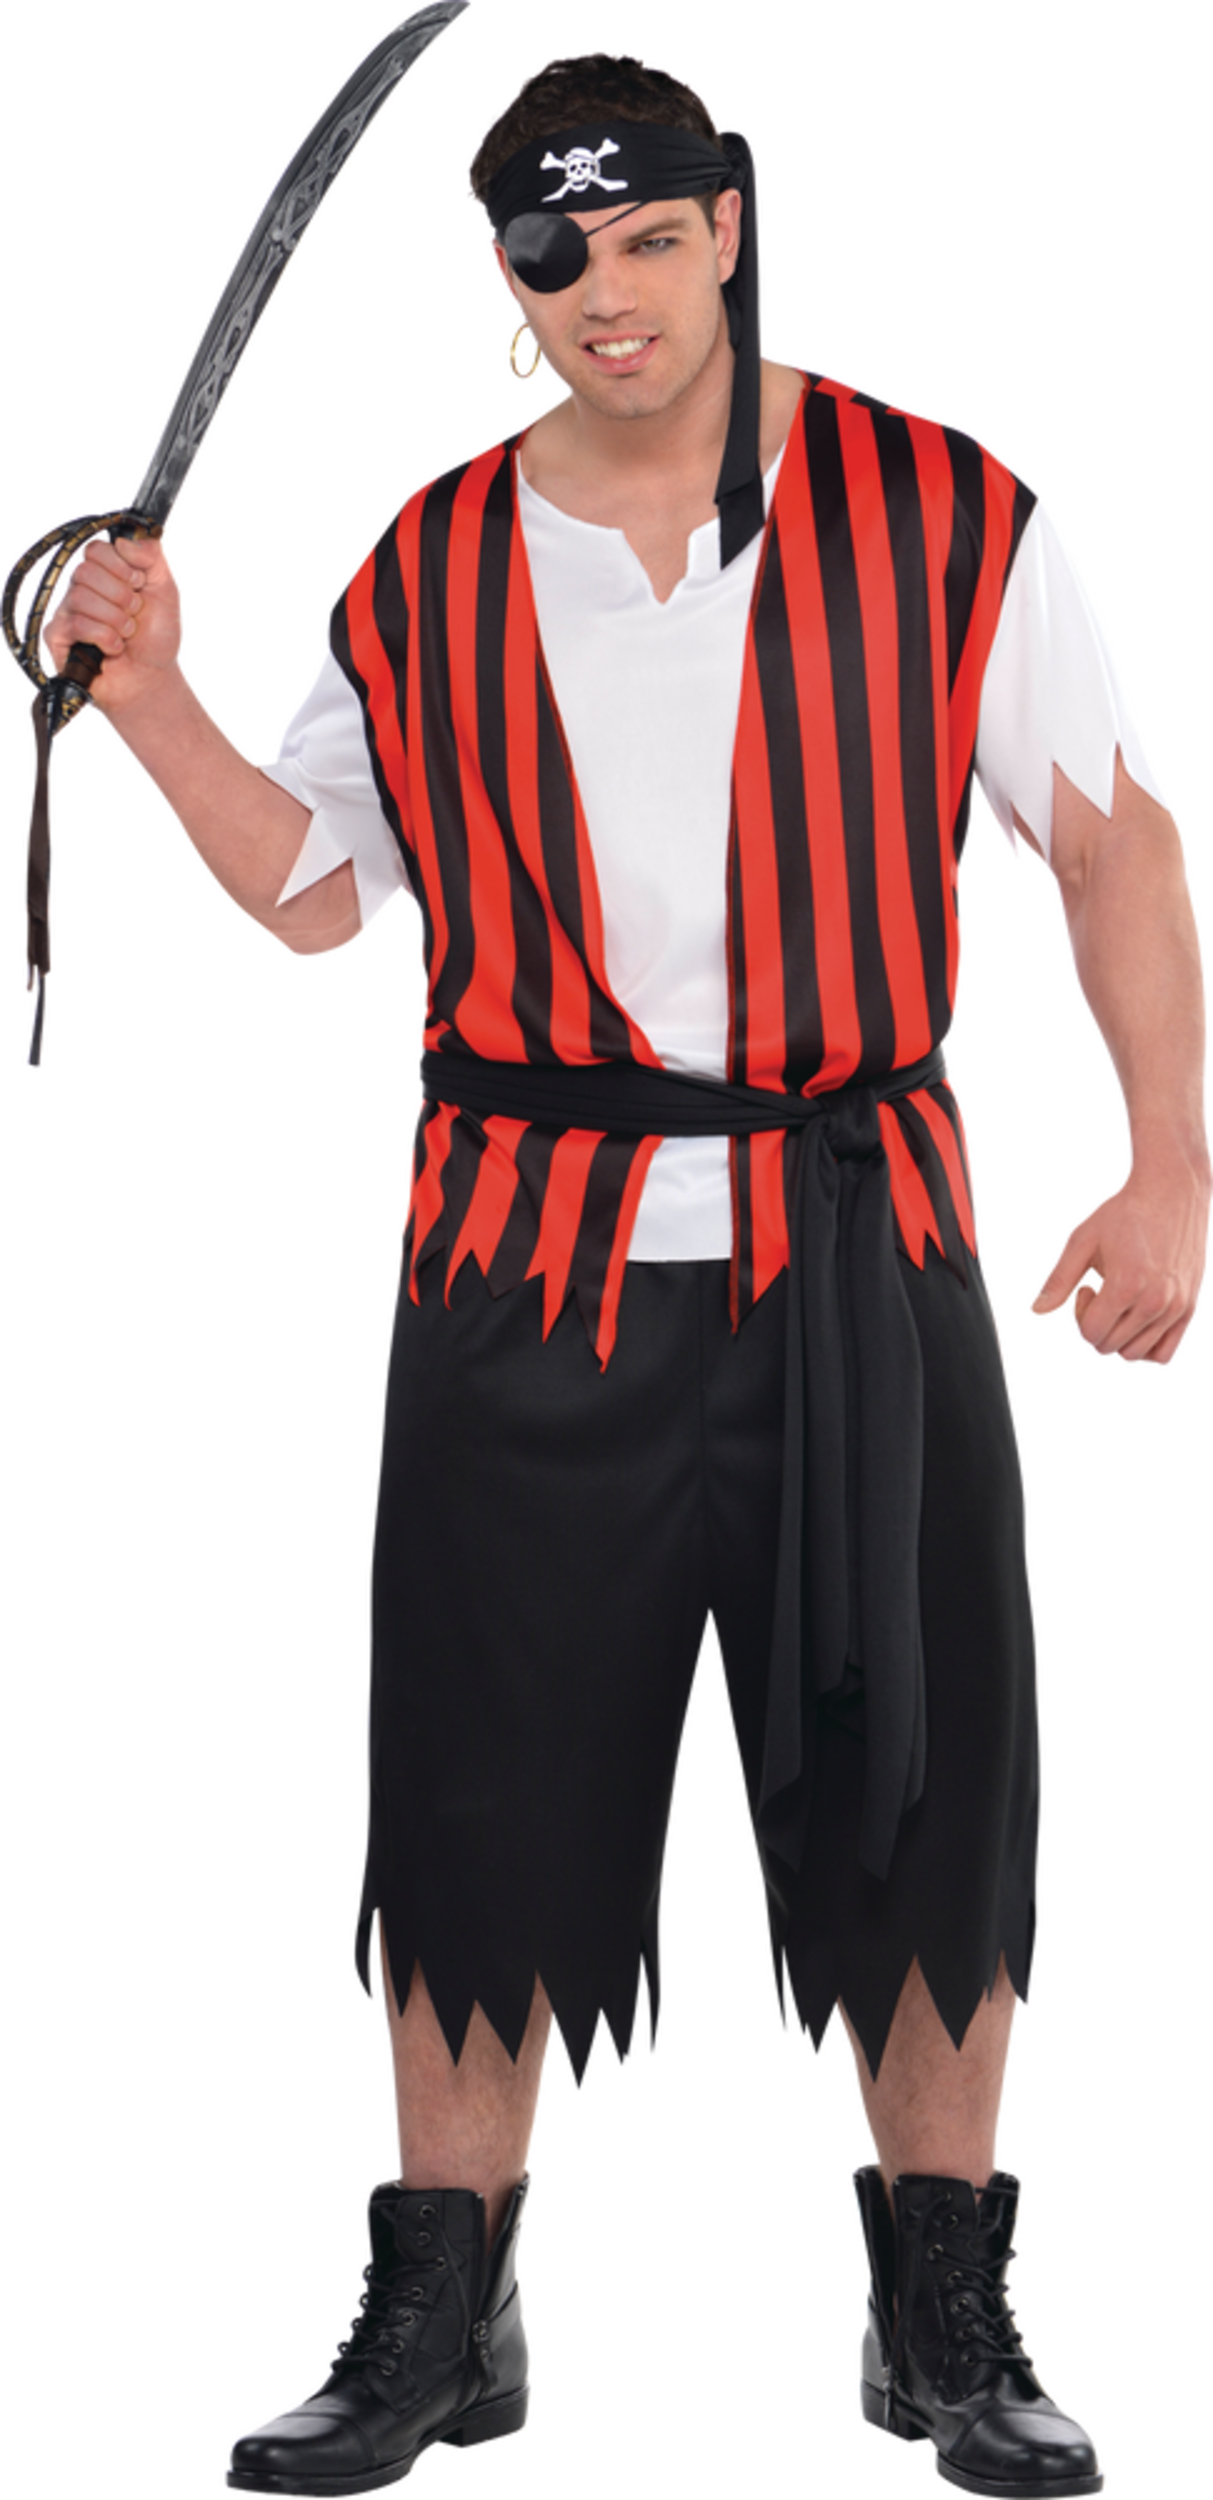 Mens Ahoy Matey Pirate Blackred Striped Outfit With Shirtpantsbandana Halloween Costume 0082